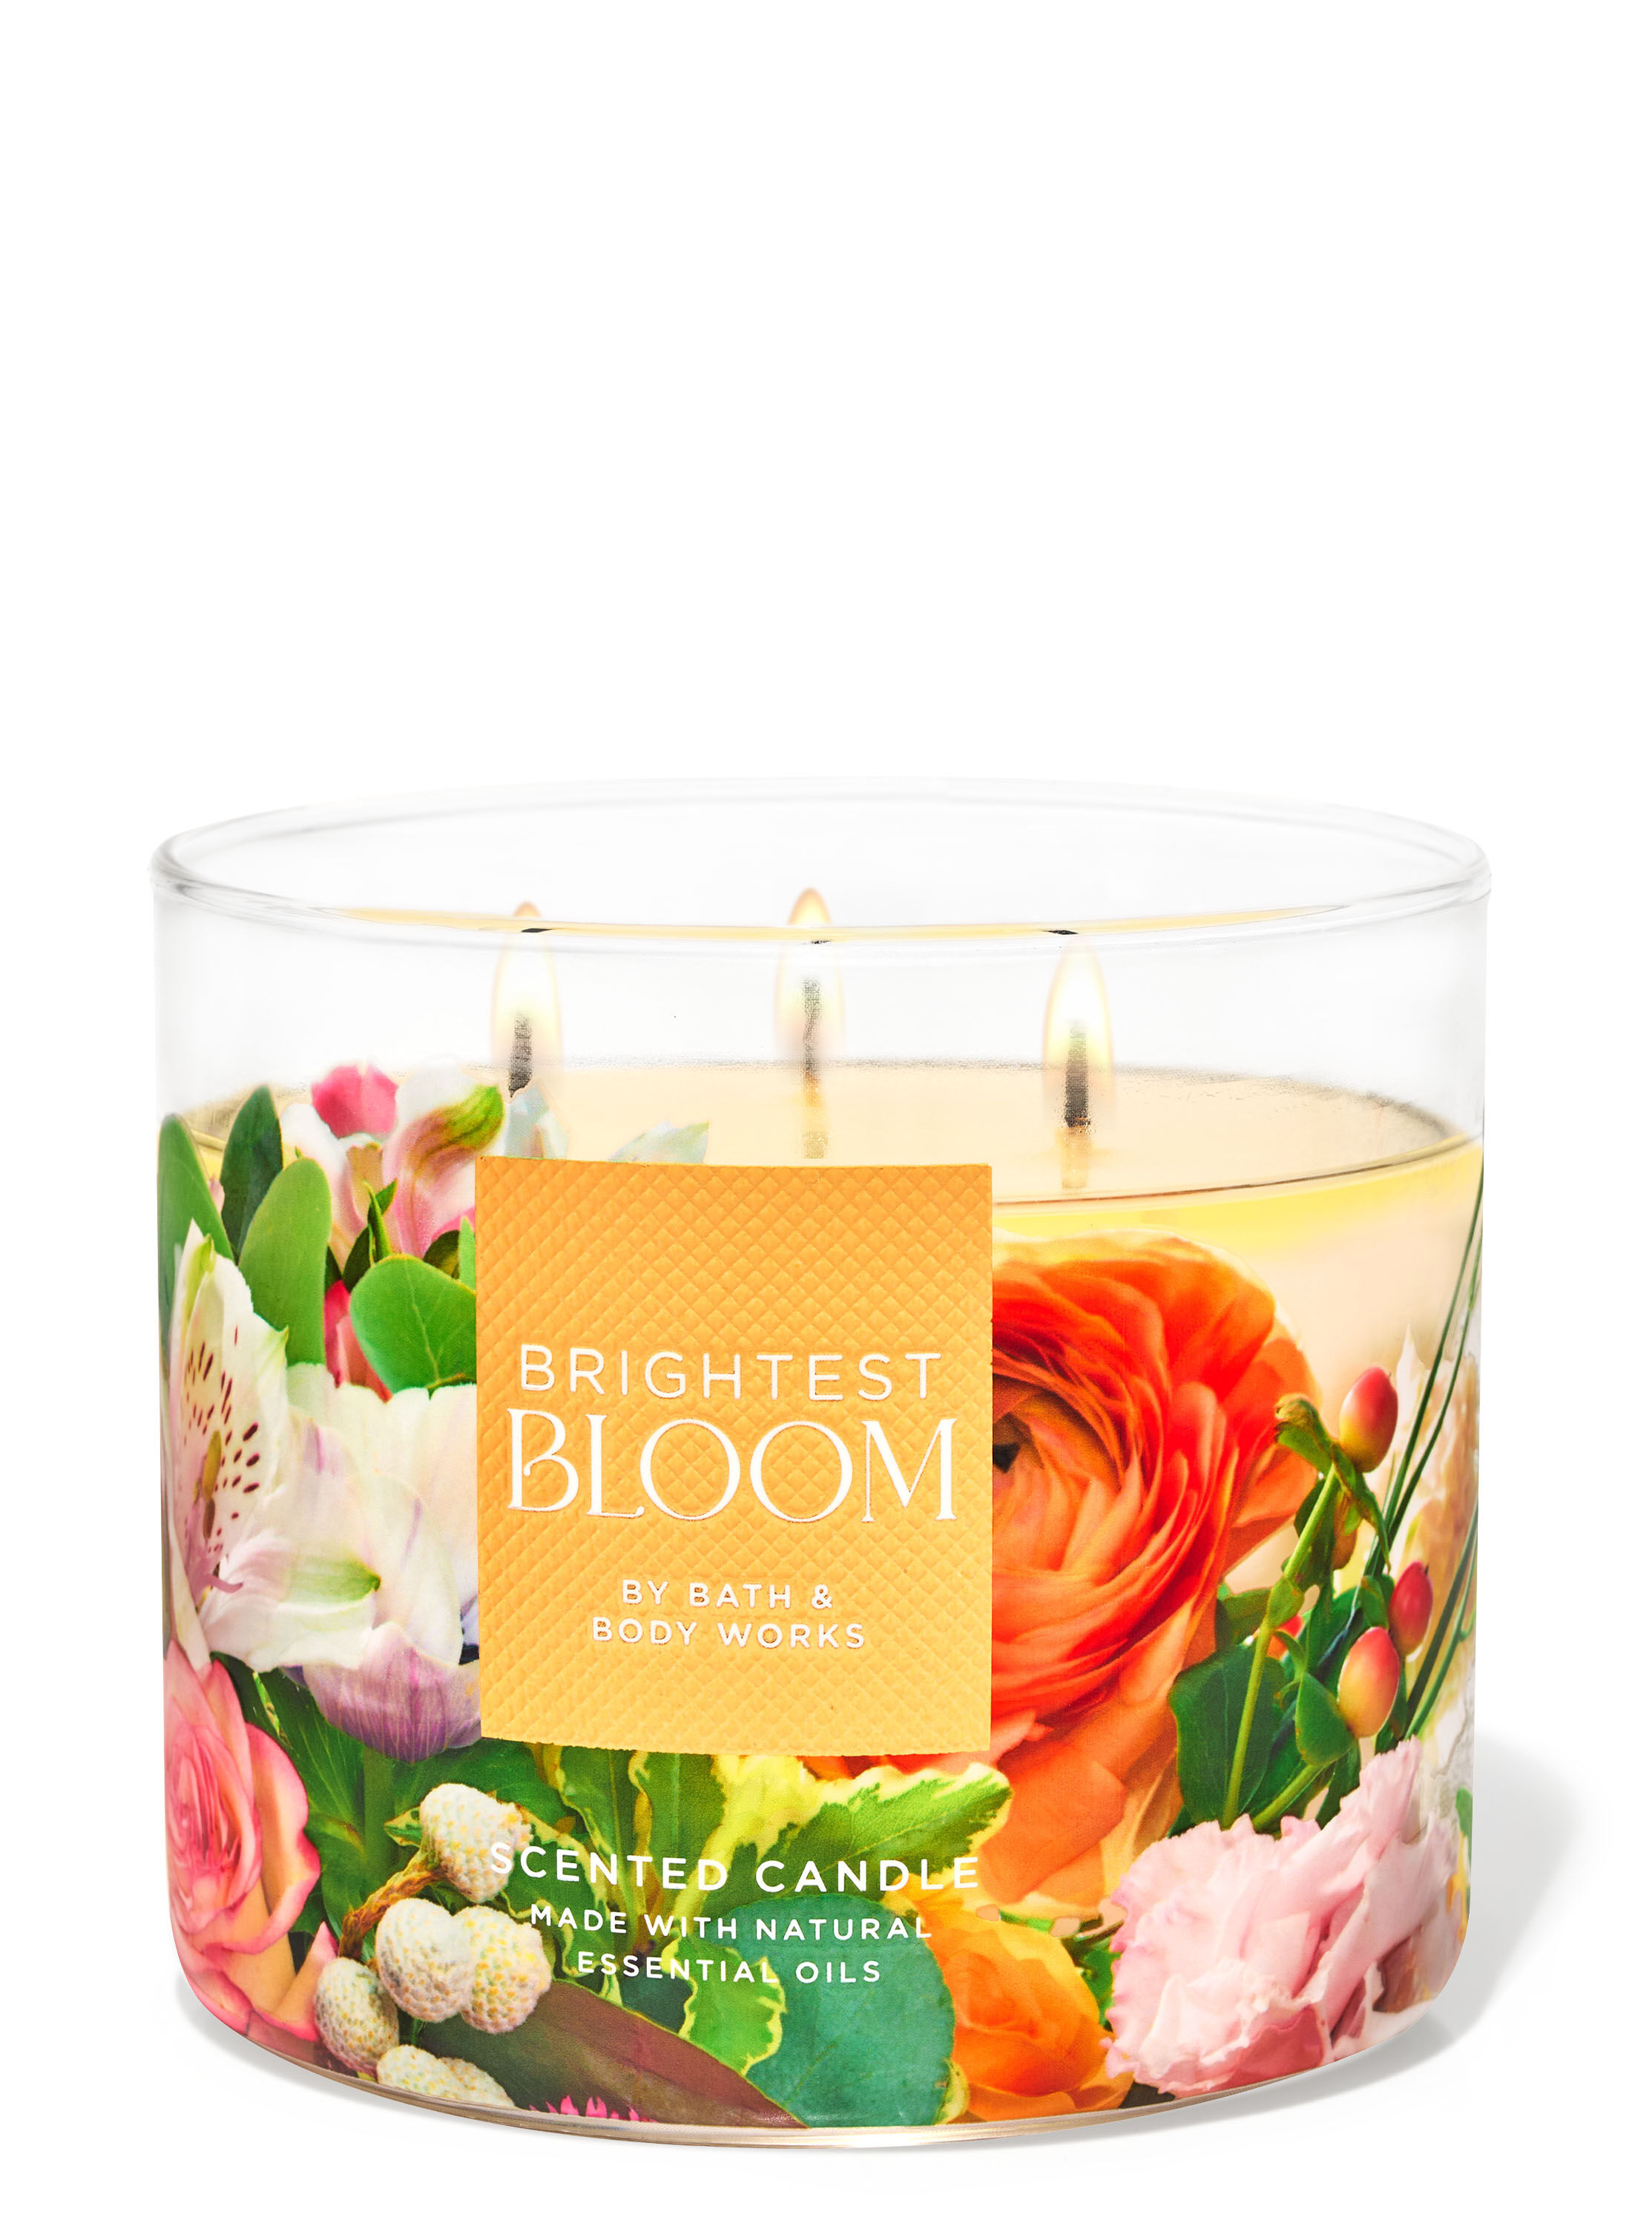 Brightest Bloom 3-Wick Candle